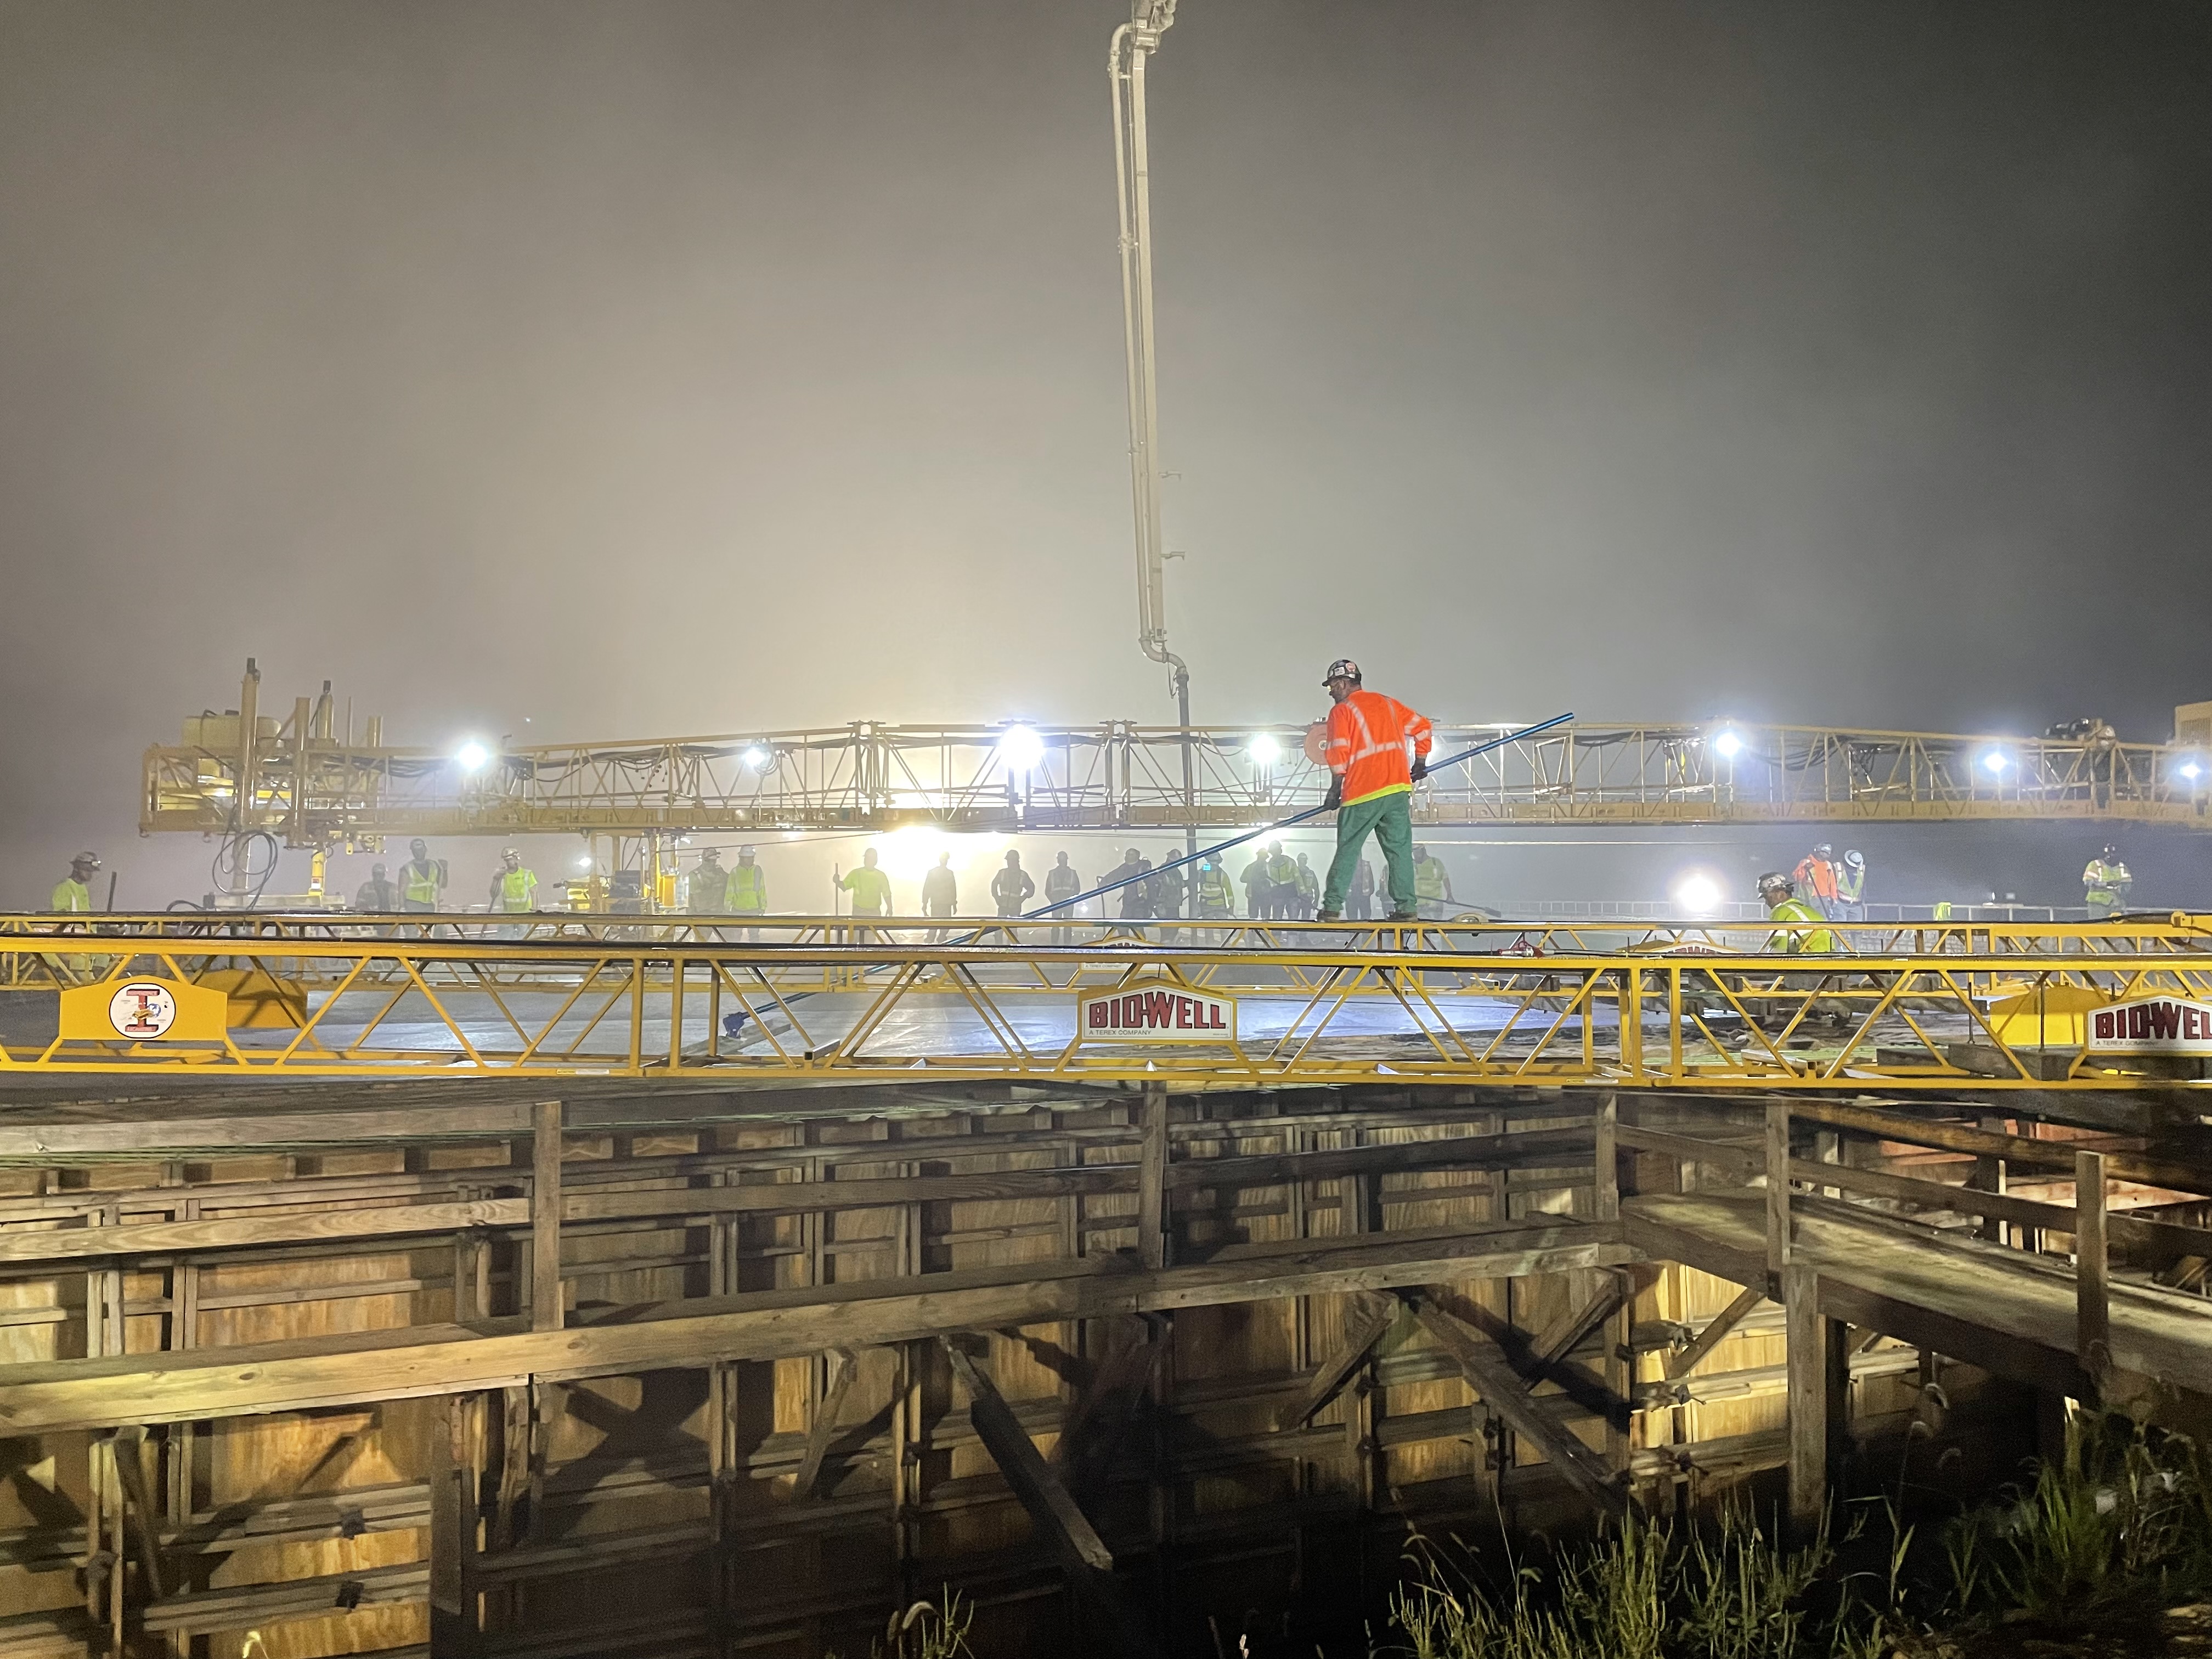 Construction workers in safety gear work on top of a bridge at night.